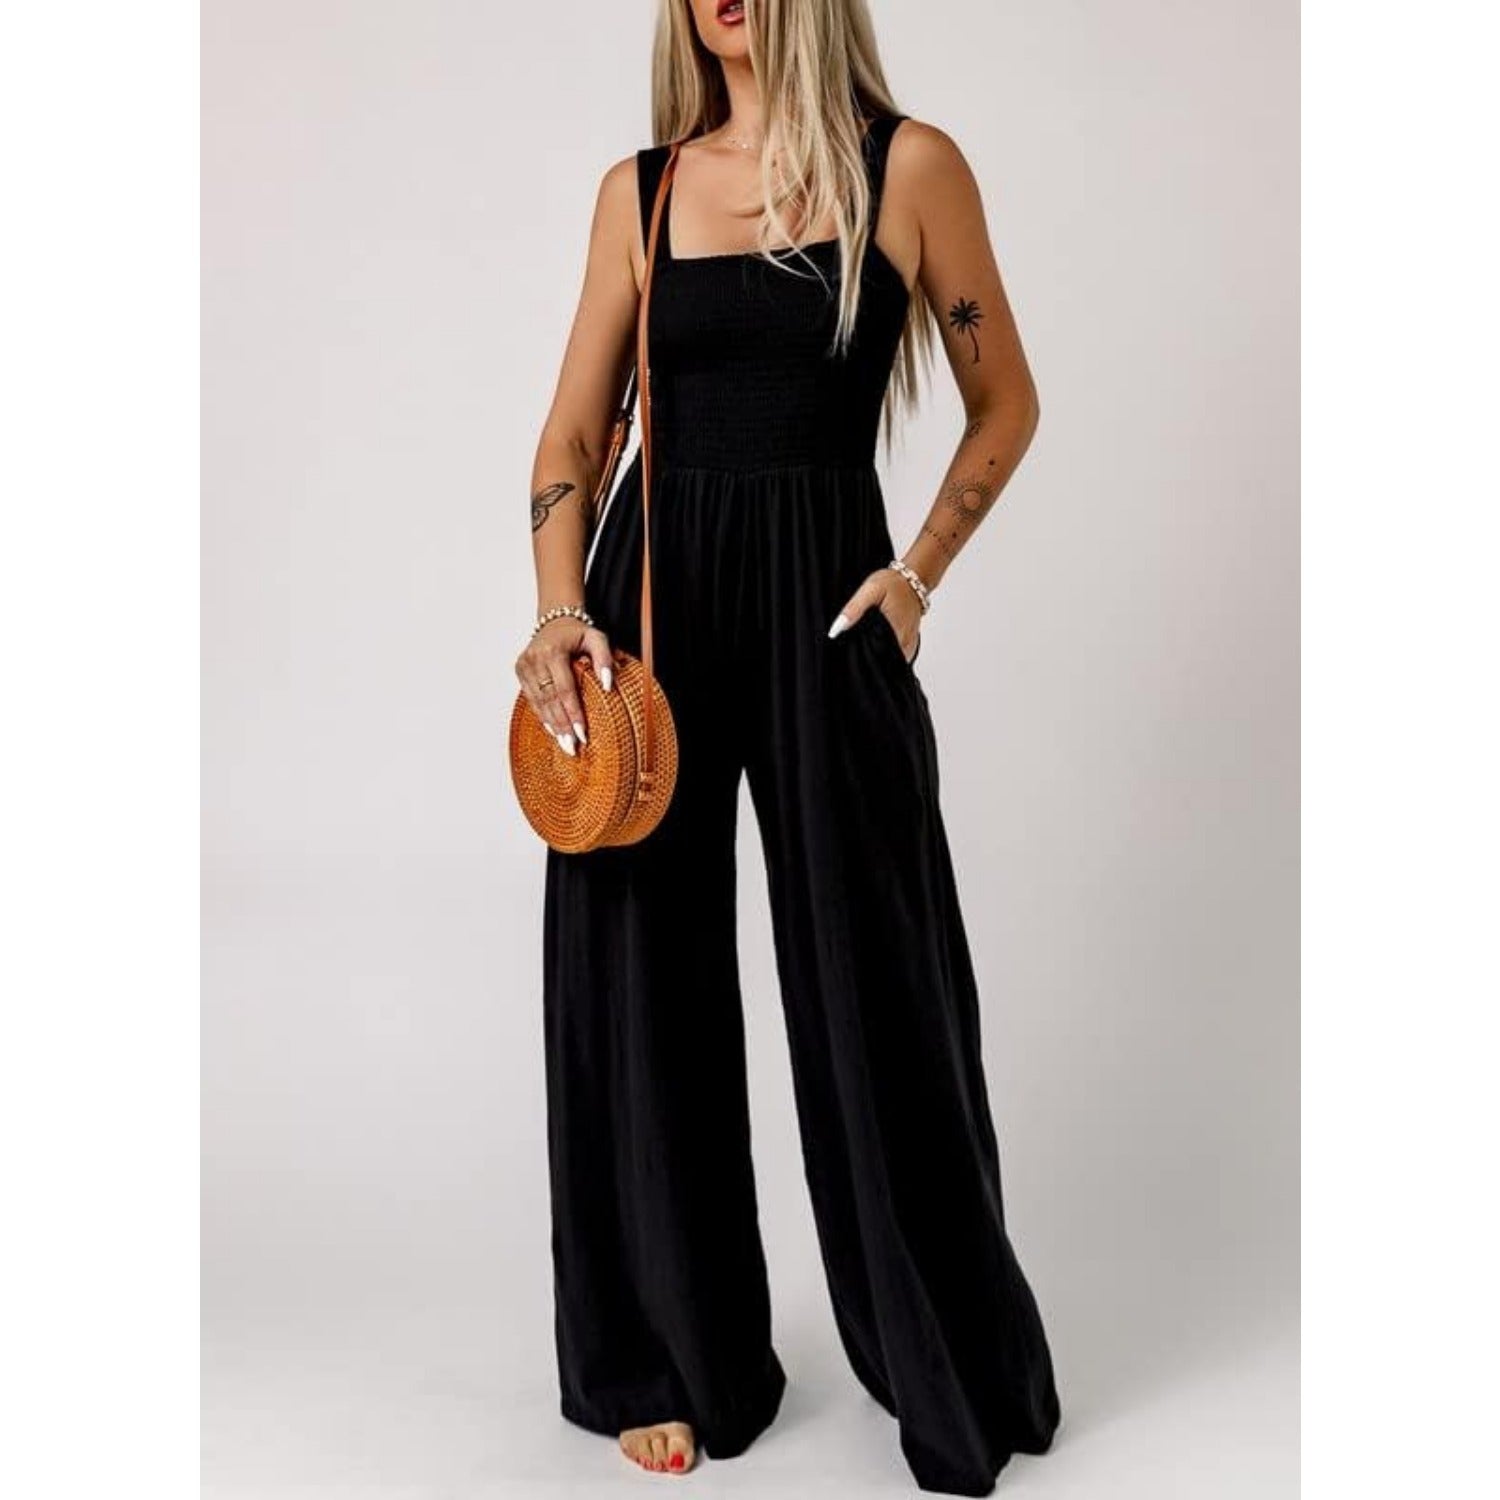 Women's Casual Loose Overalls Jumpsuits One Piece Sleeveless Wide Leg Long Pant Rompers With Pockets